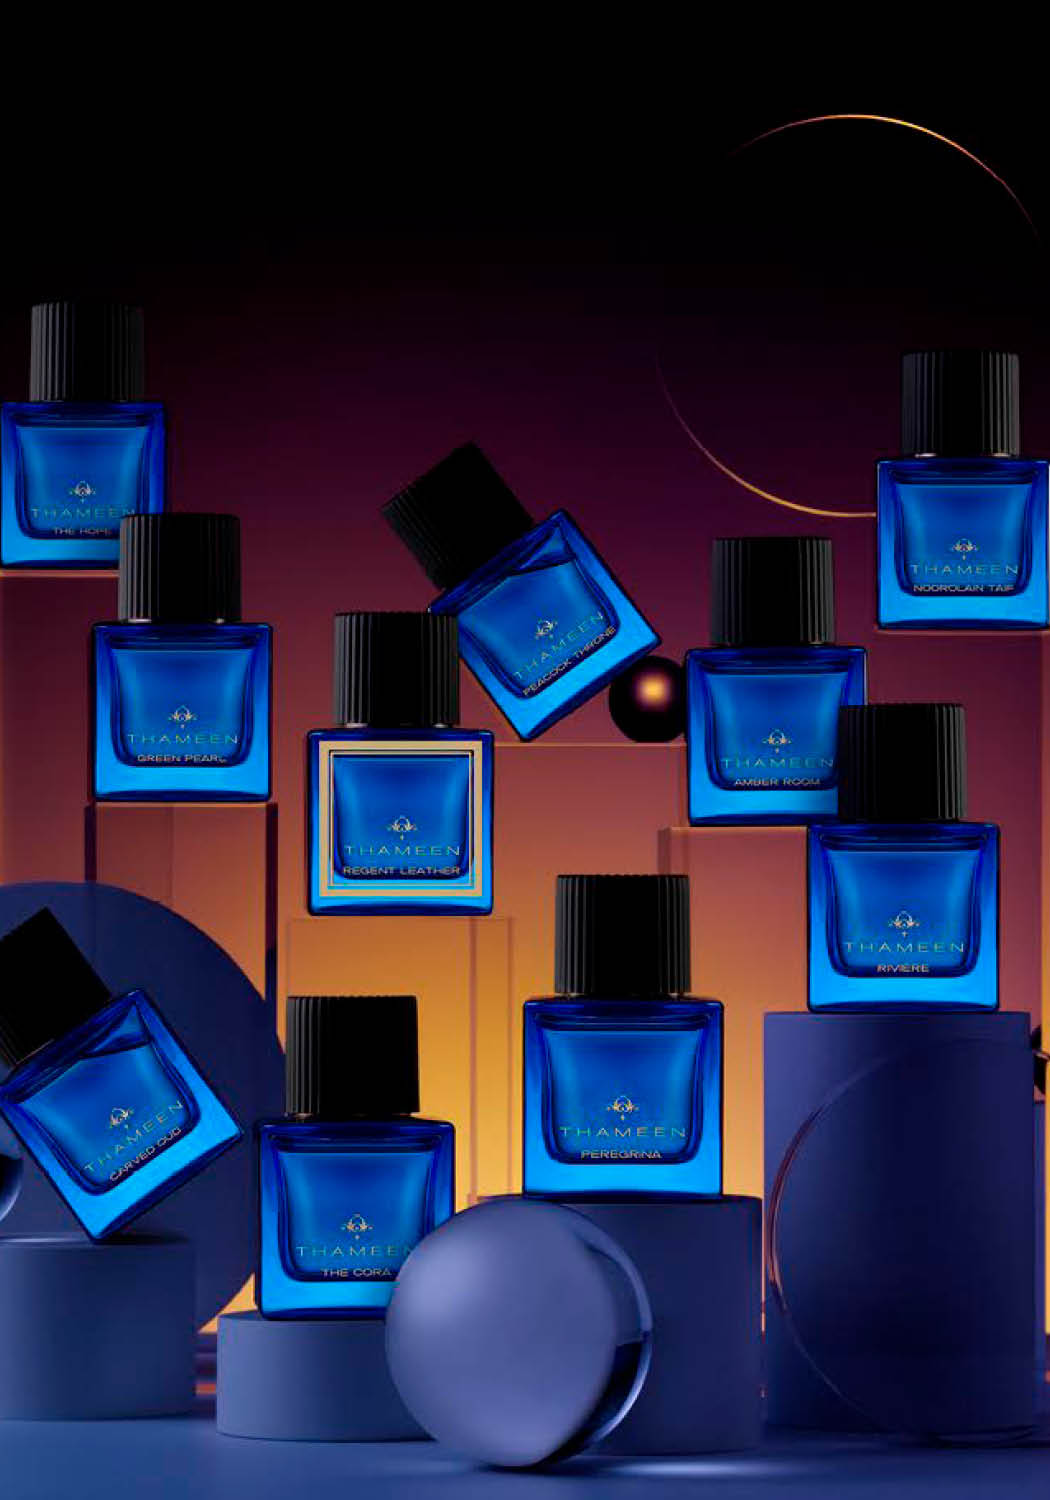 Every fragrance is created by world-class perfumers